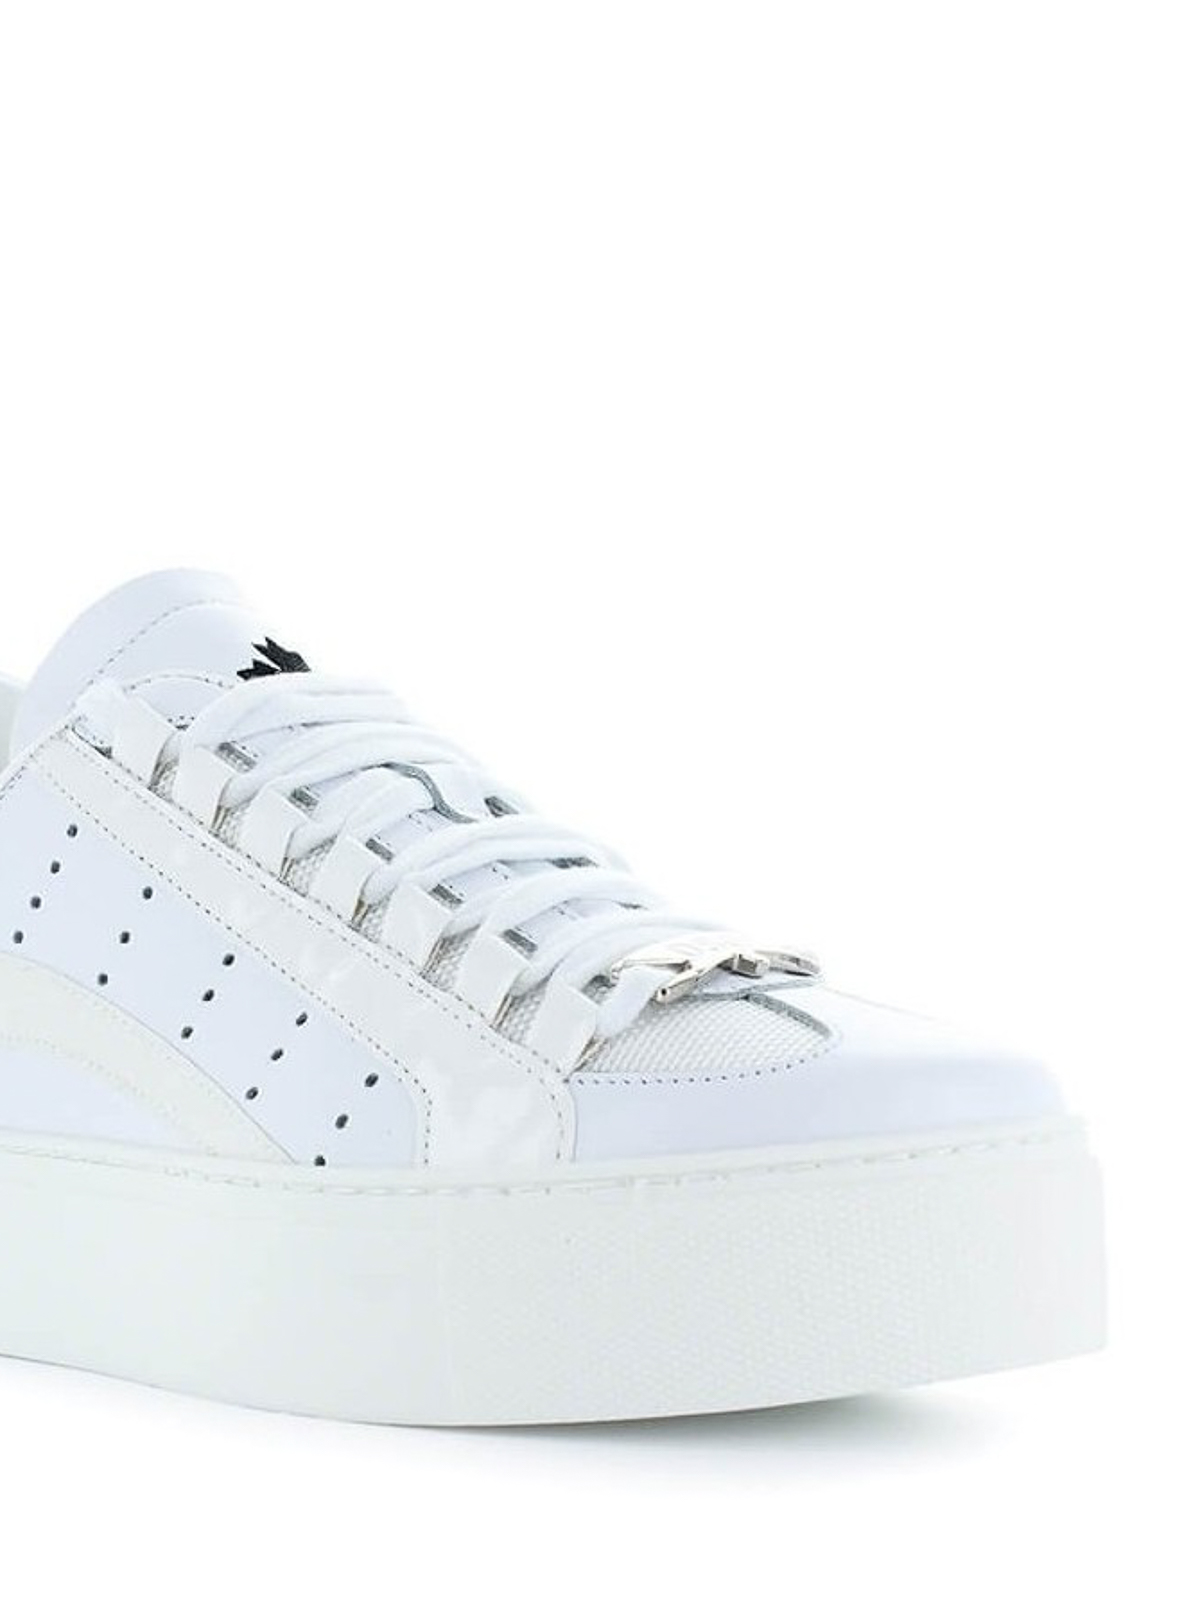 dsquared 551 sneakers white